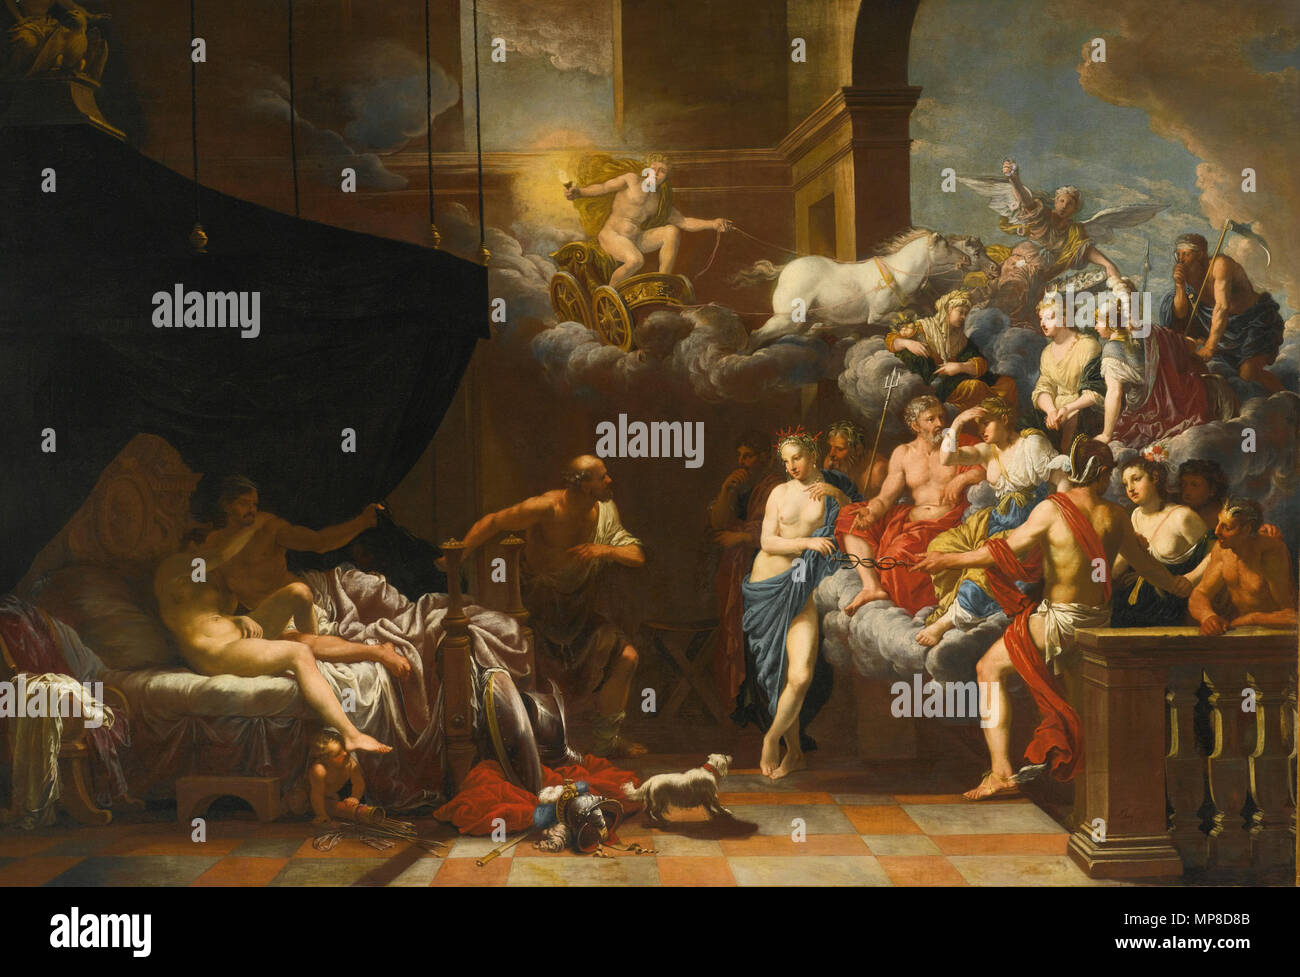 . English: JOHANN HEISS, MEMMINGEN 1640 - 1704 AUGSBURG, VULCAN SURPRISING VENUS AND MARS IN BED BEFORE AN ASSEMBLY OF THE GODS, signed and dated lower right on balustrade: JHeiss 1679, oil on canvas, 134.9 by 196.9 cm. 25 January 2013, 16:16:44. Johann Heiss (1640-1704) 726 JOHANN HEISS VULCAN SURPRISING VENUS AND MARS Stock Photo